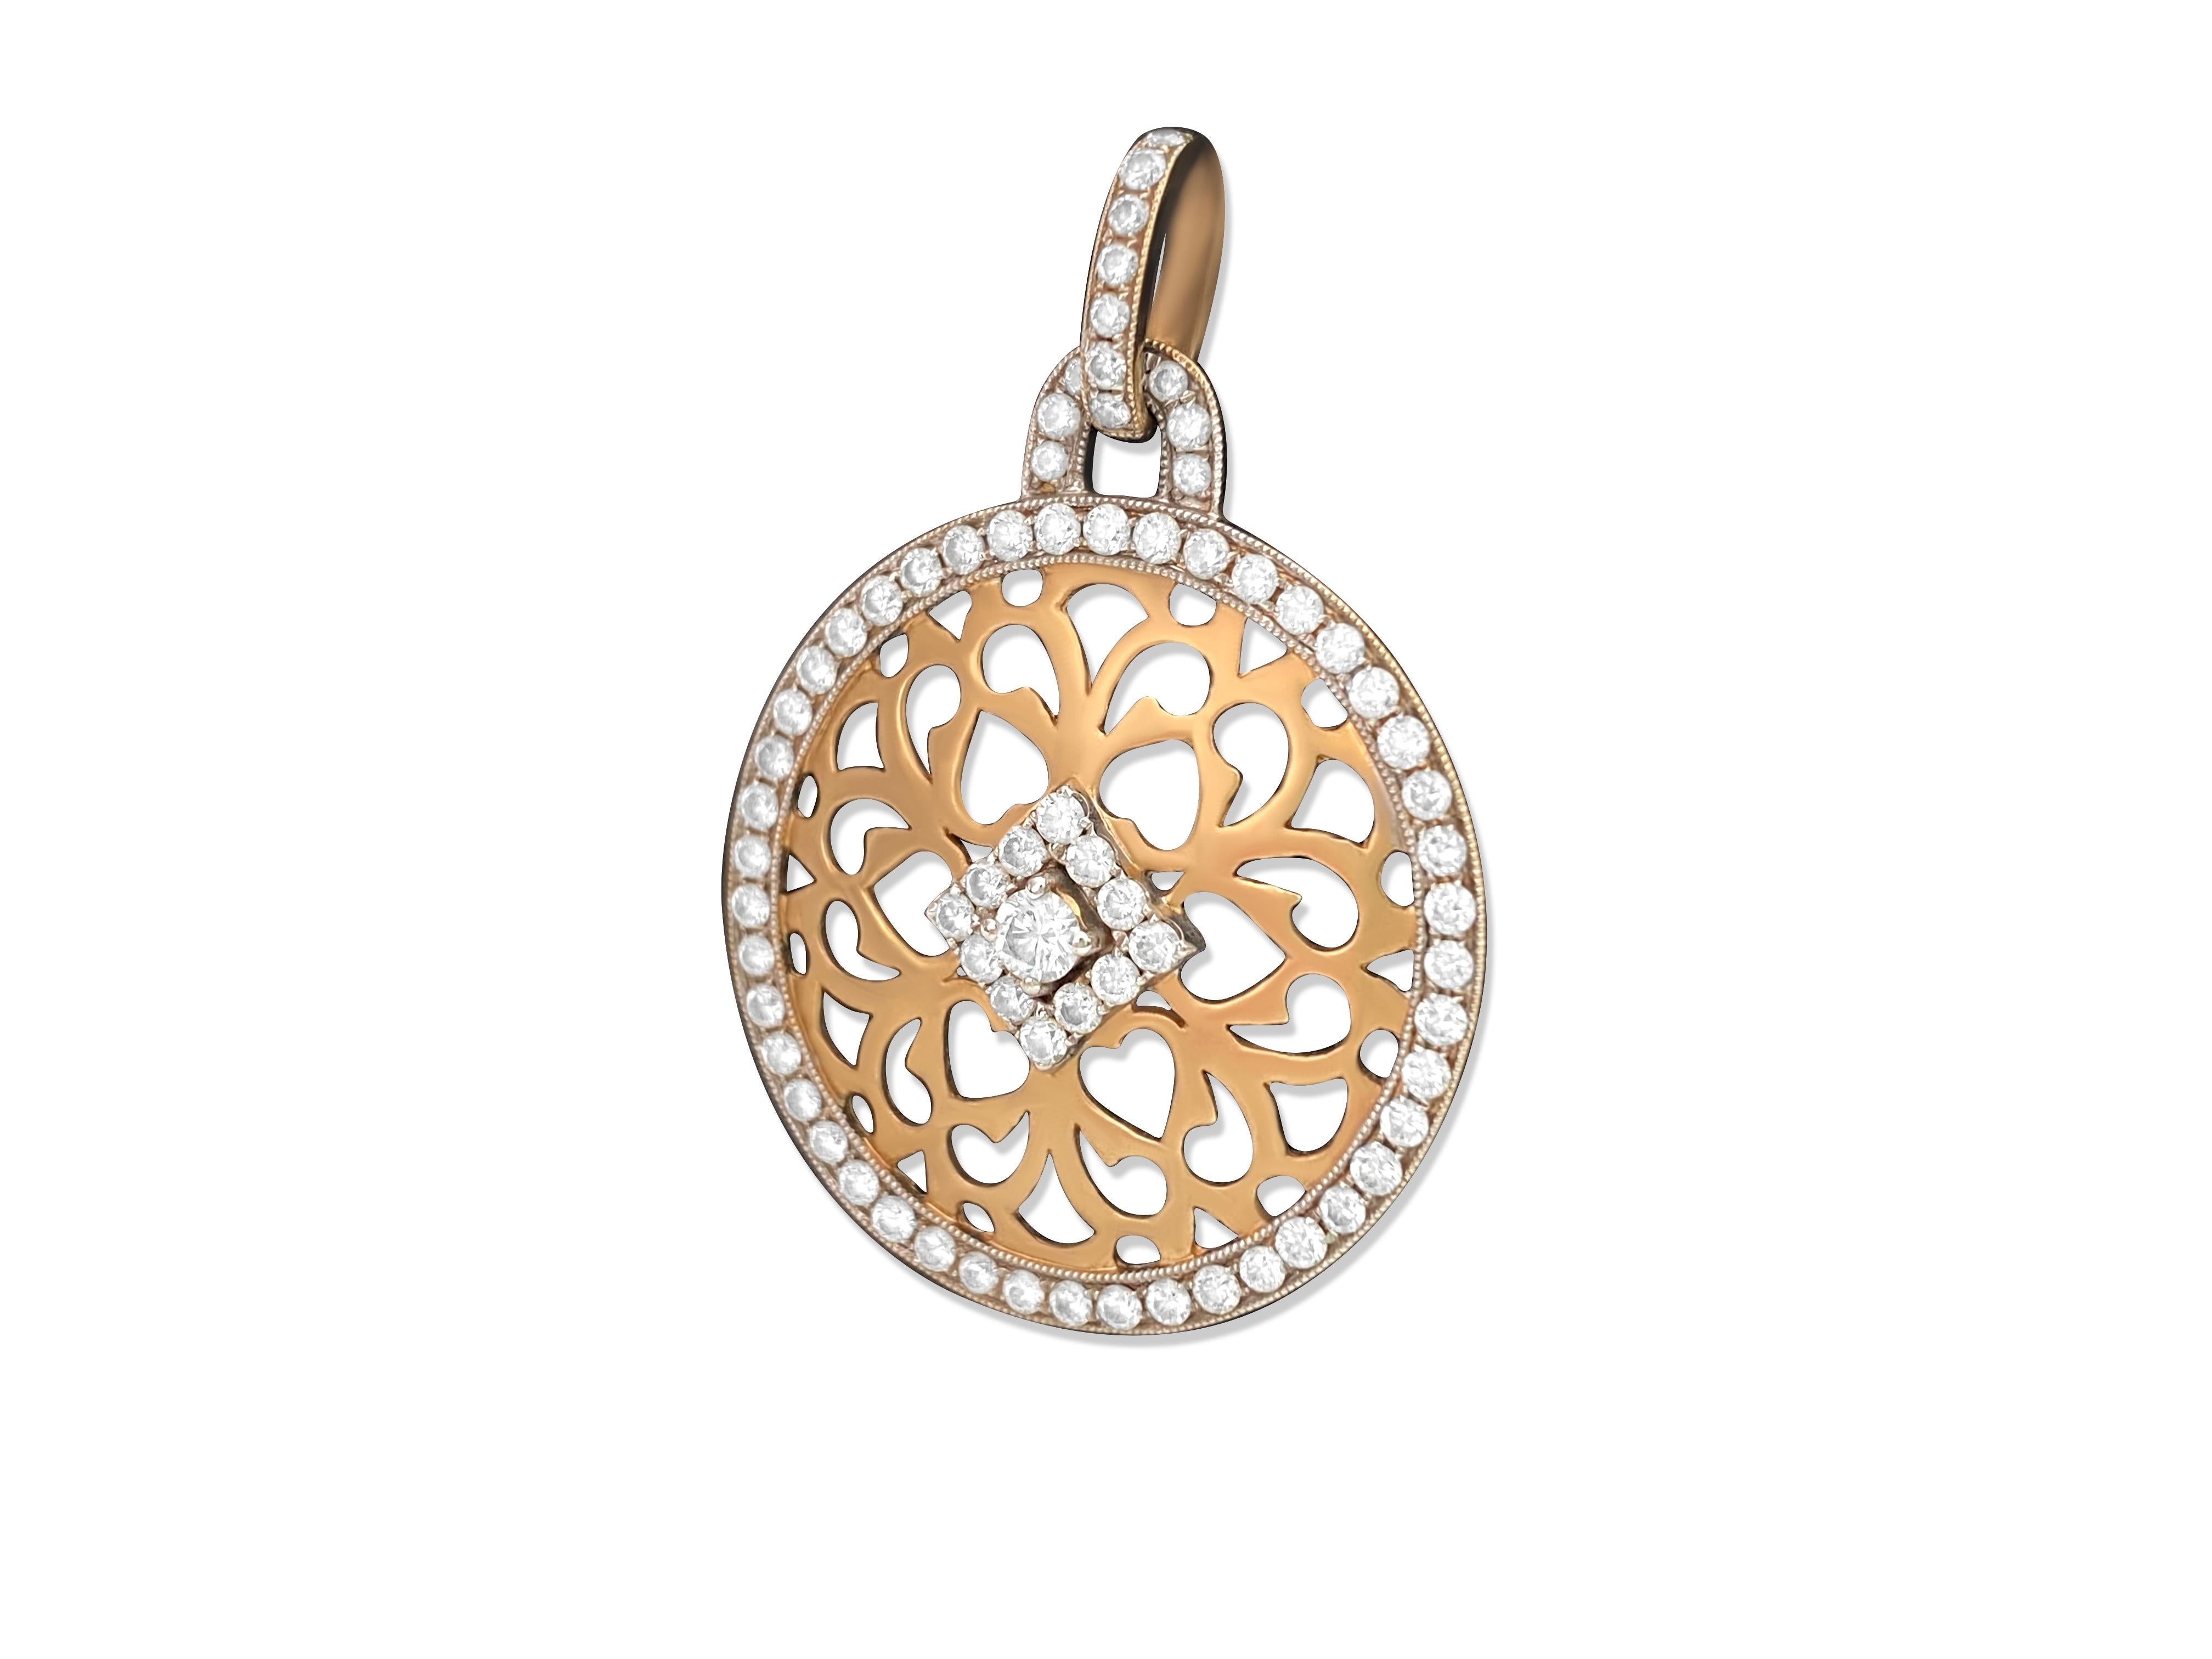 A pretty necklace made of shiny yellow and white gold with real diamonds. The pendant is not too heavy, weighing 4.75 grams. The diamonds are really good quality, with a nice sparkle, and they're in a classic round shape. These diamonds are natural